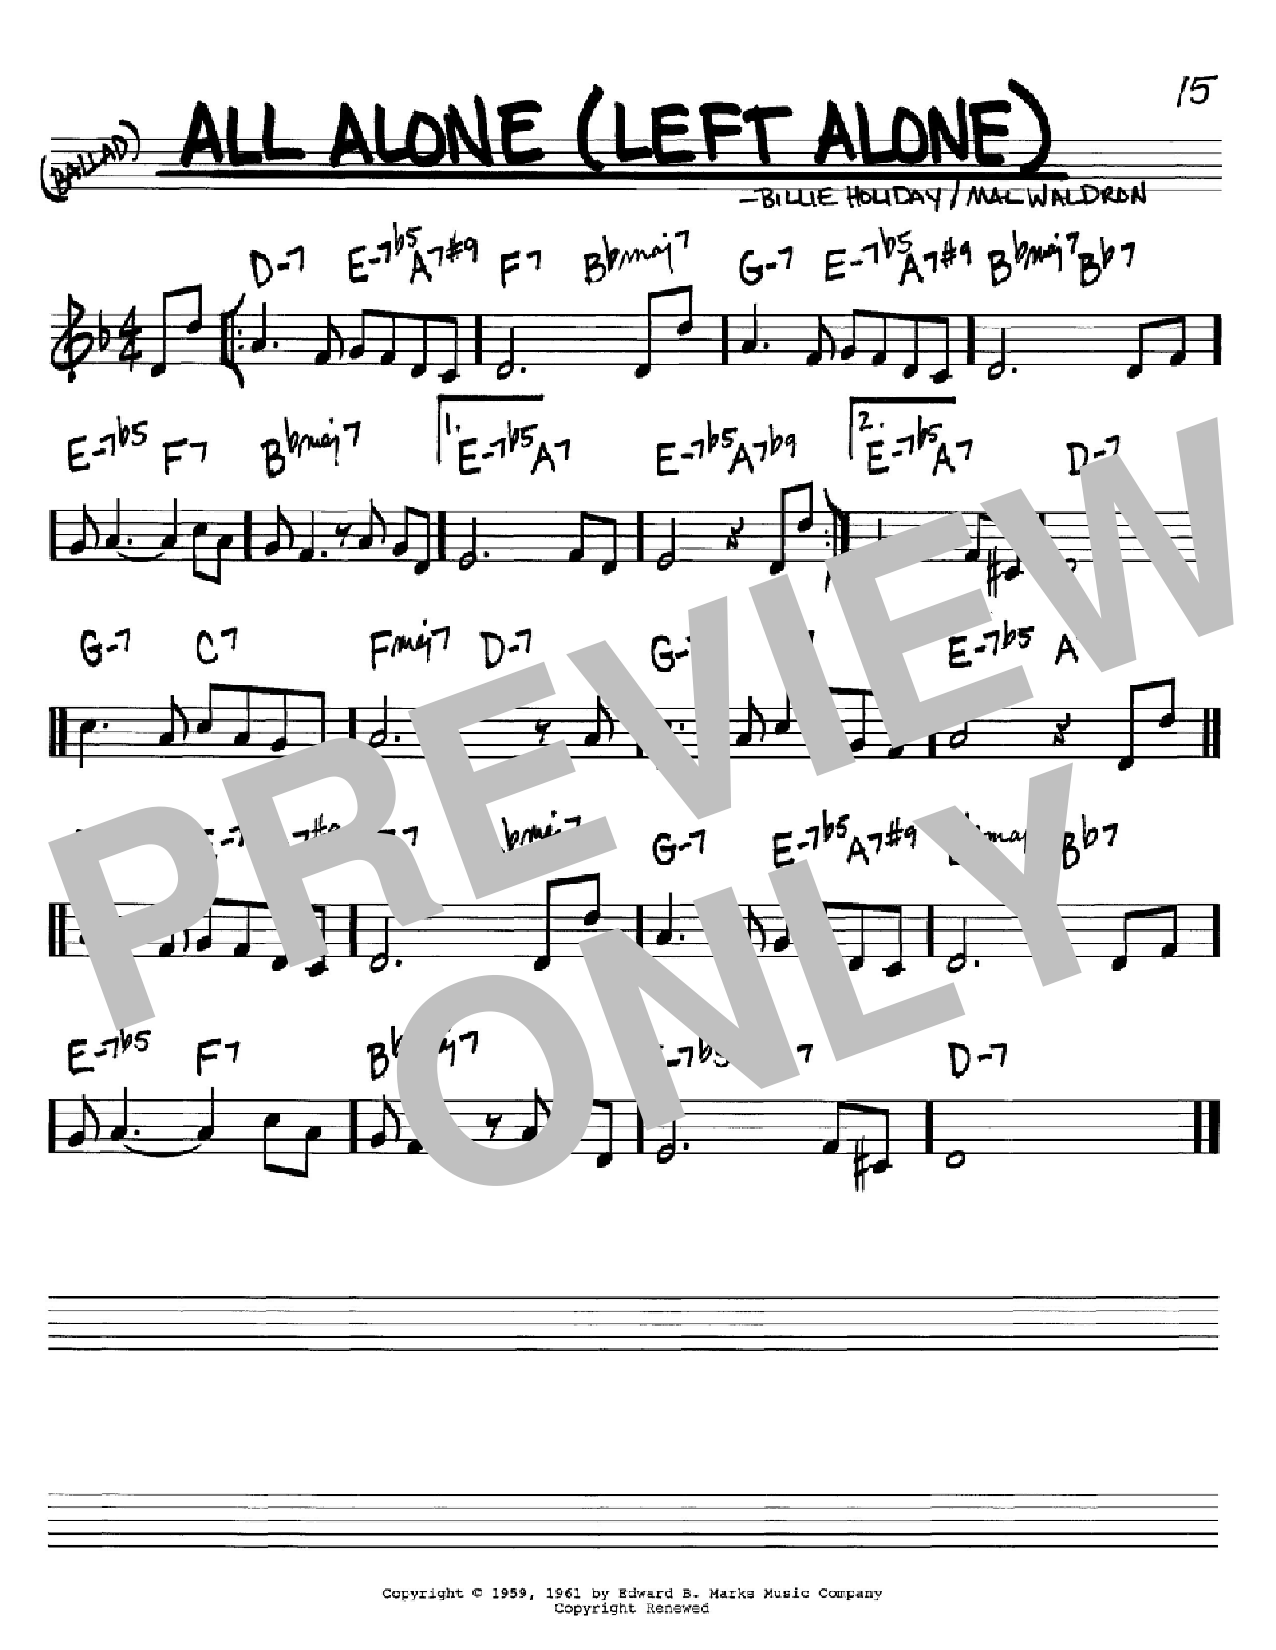 Download Billie Holiday All Alone (Left Alone) Sheet Music